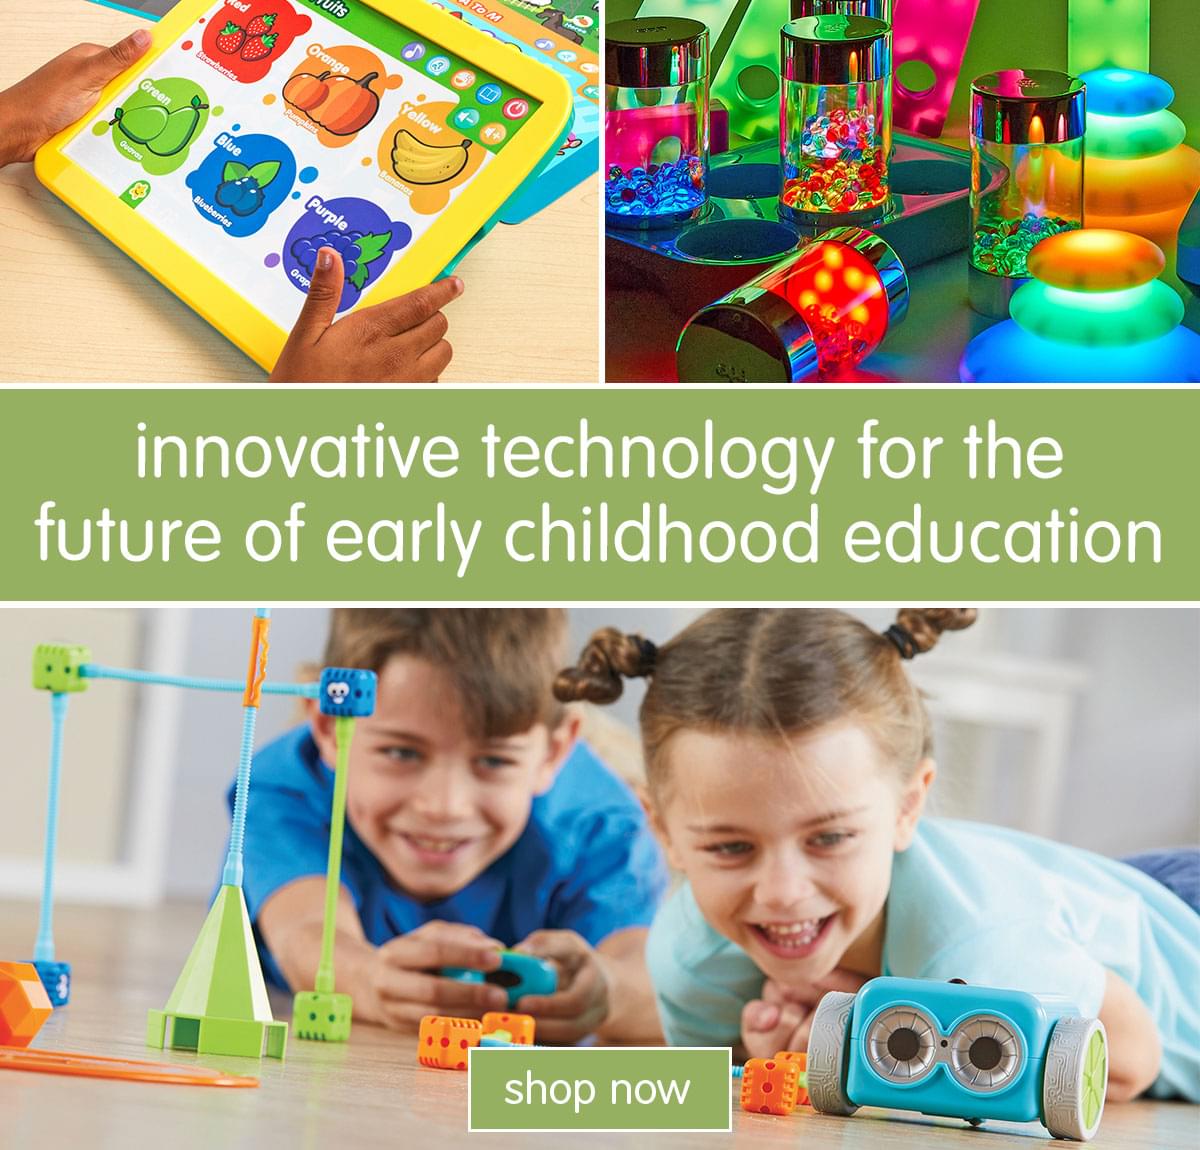 Innovative technology for the future of early childhood education